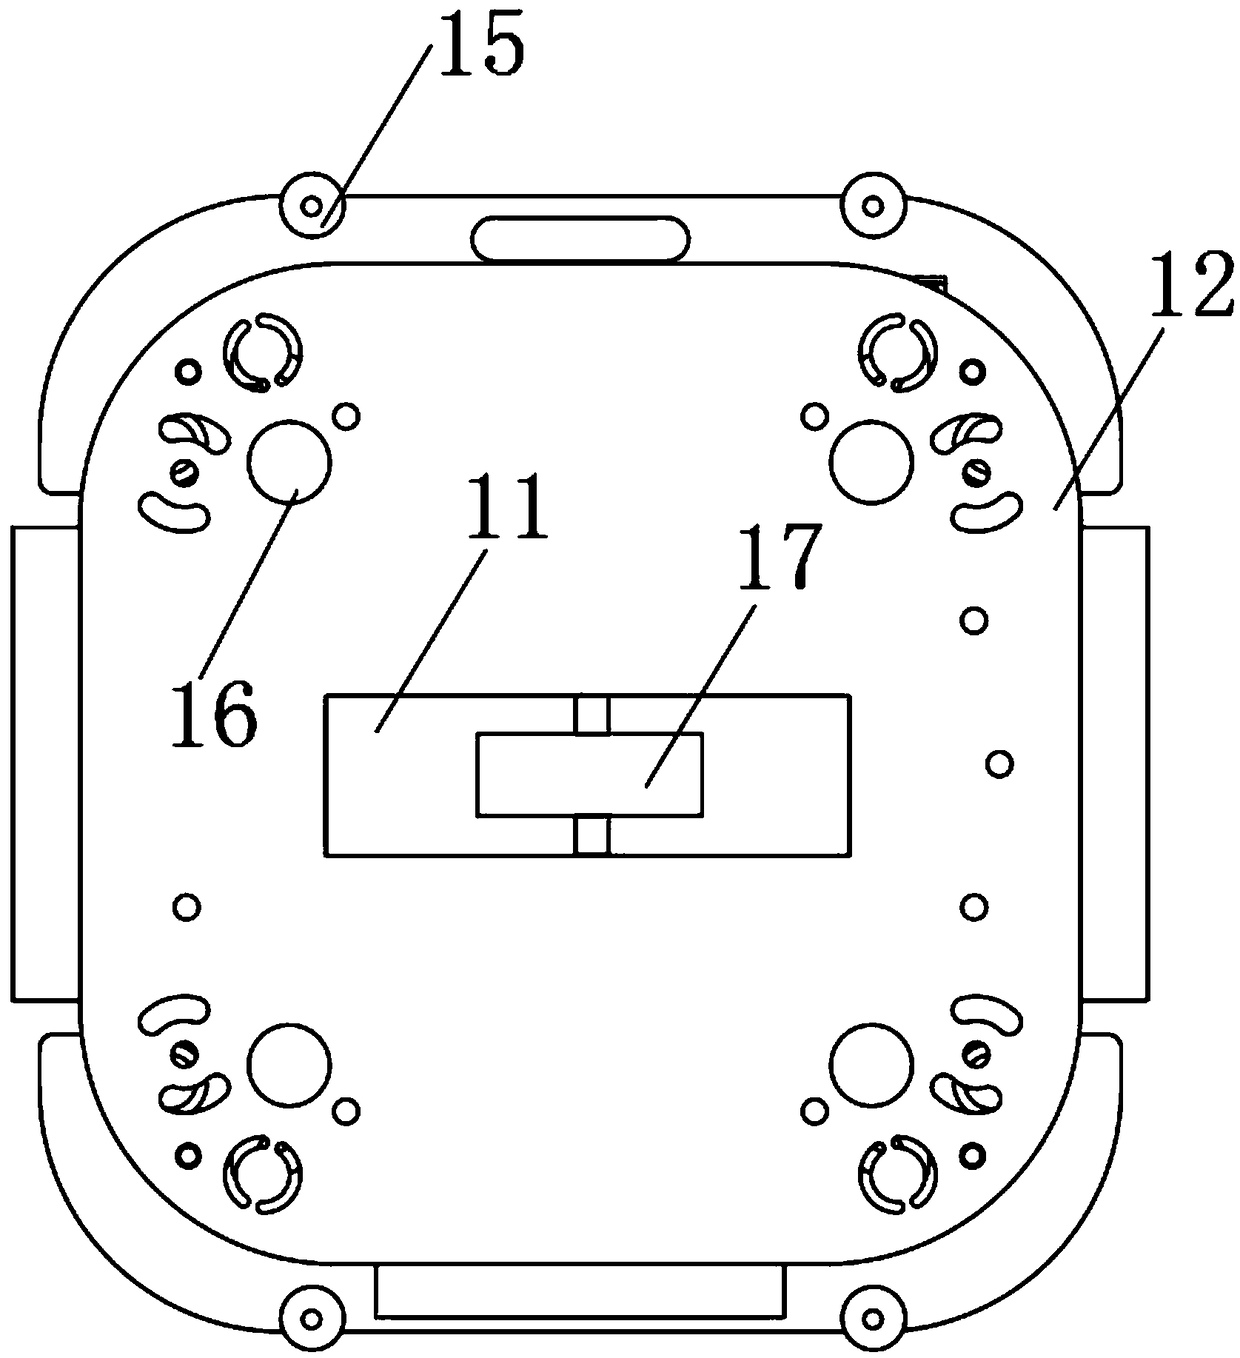 Online hollow cable and diameter expansion mechanism for processing same